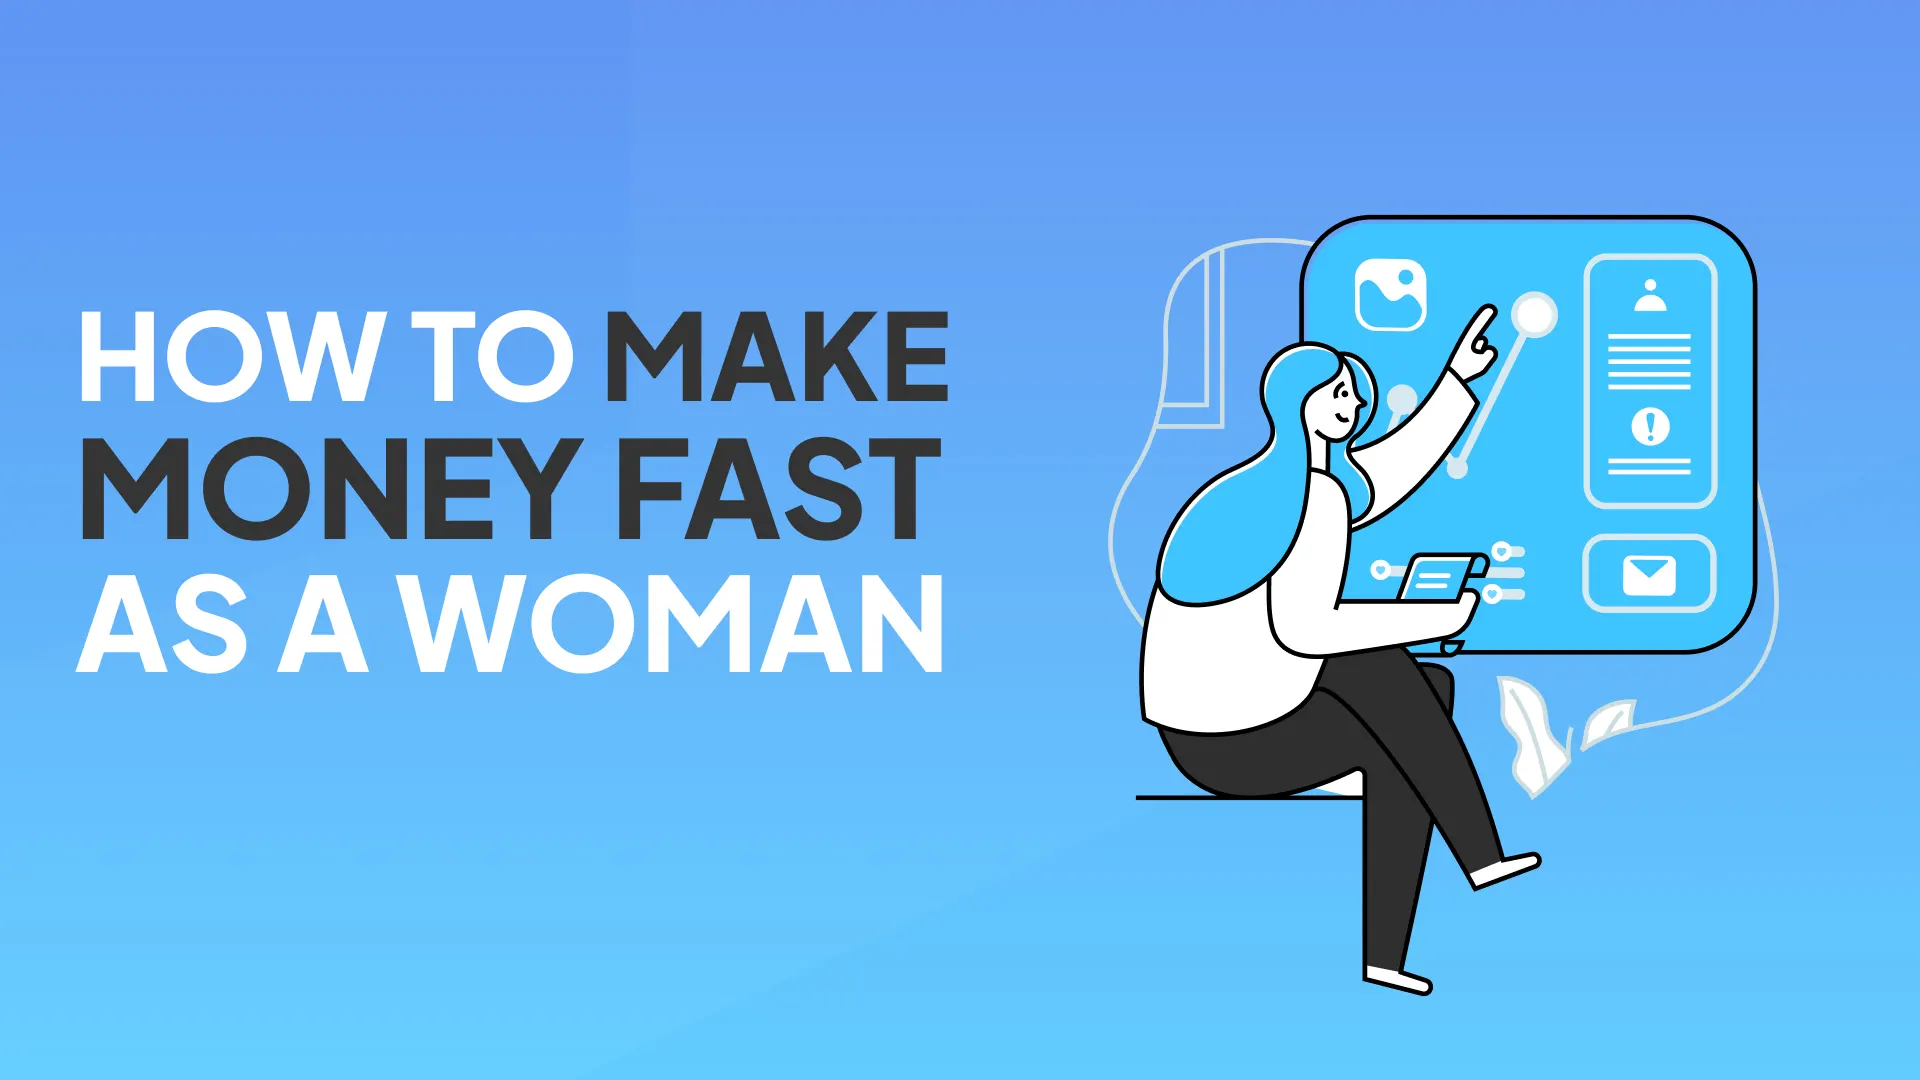 BLOG-FEATUREDIMAGE/how-to-make-money-fast-as-a-woman.webp